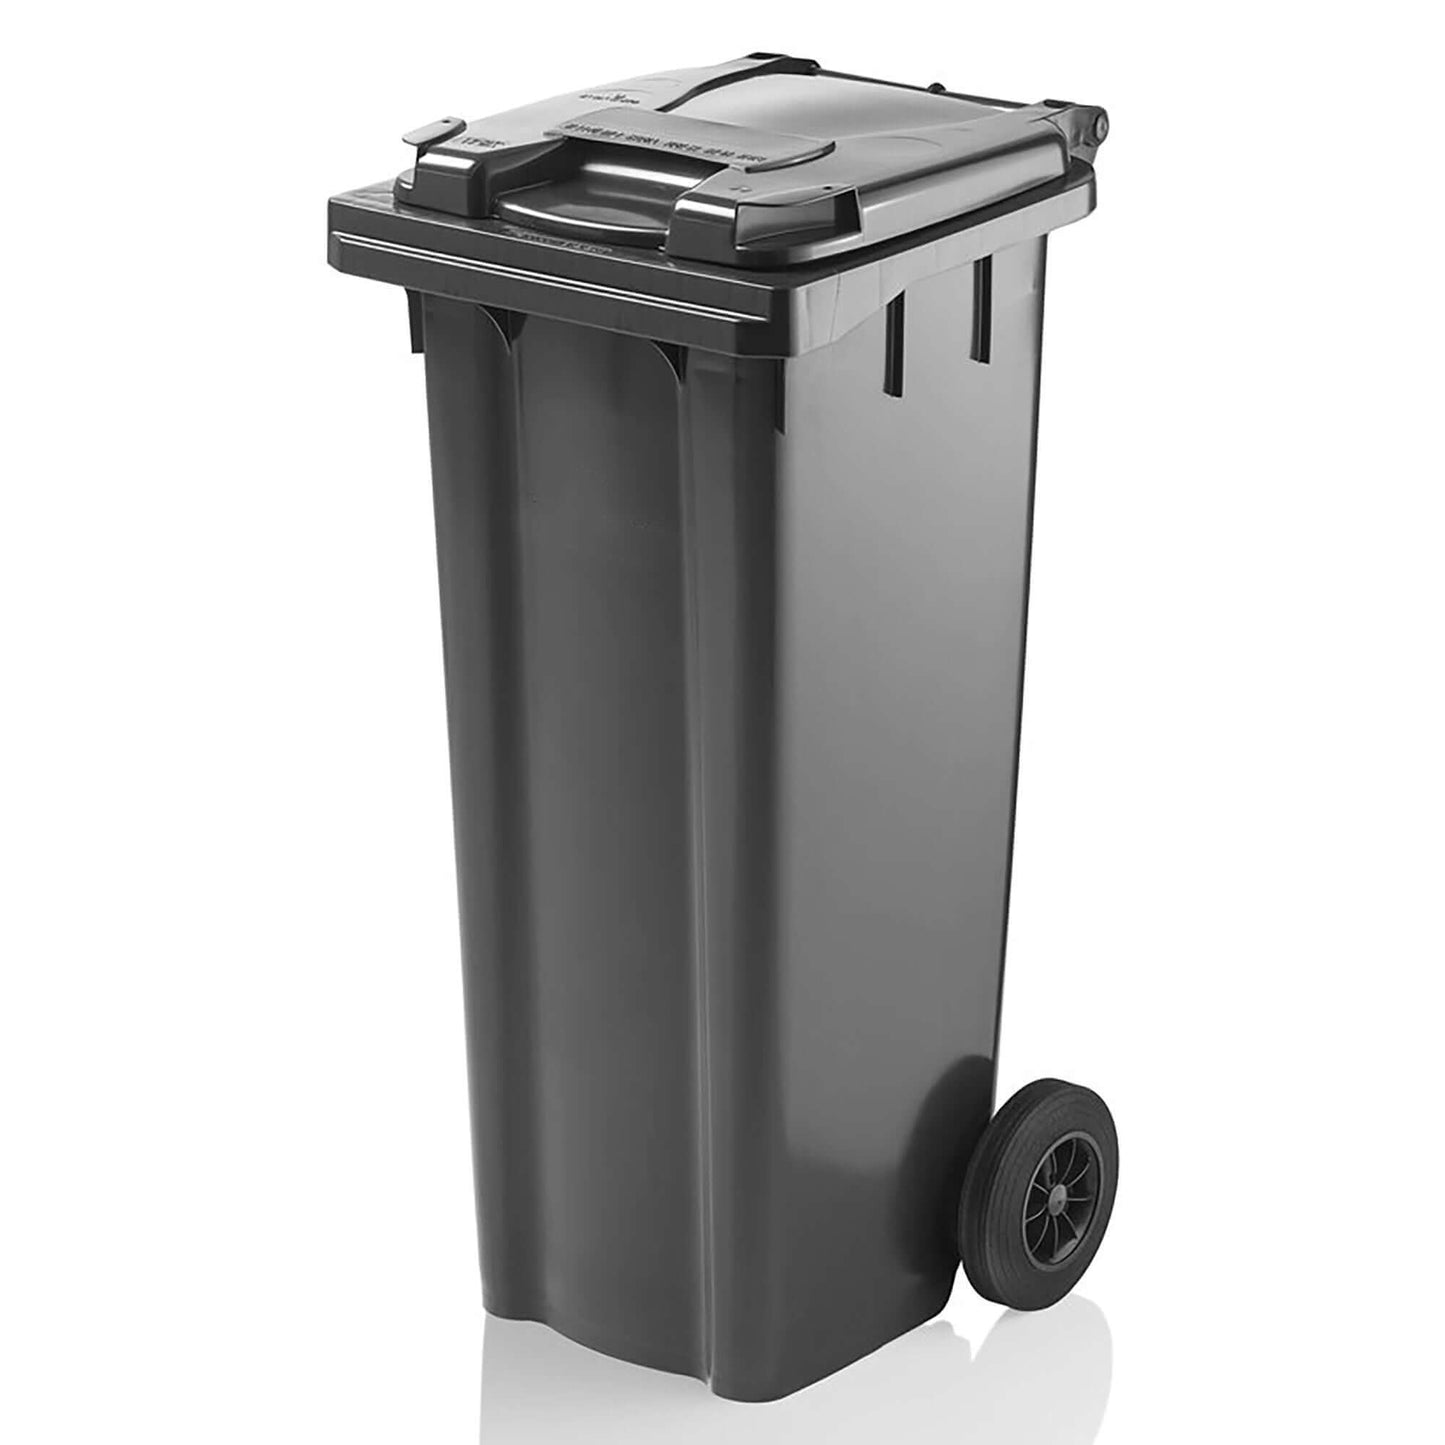 Express Wheelie Bin 140L Litre Grey Black Small Medium Council Replacement Waste Rubbish Recycle